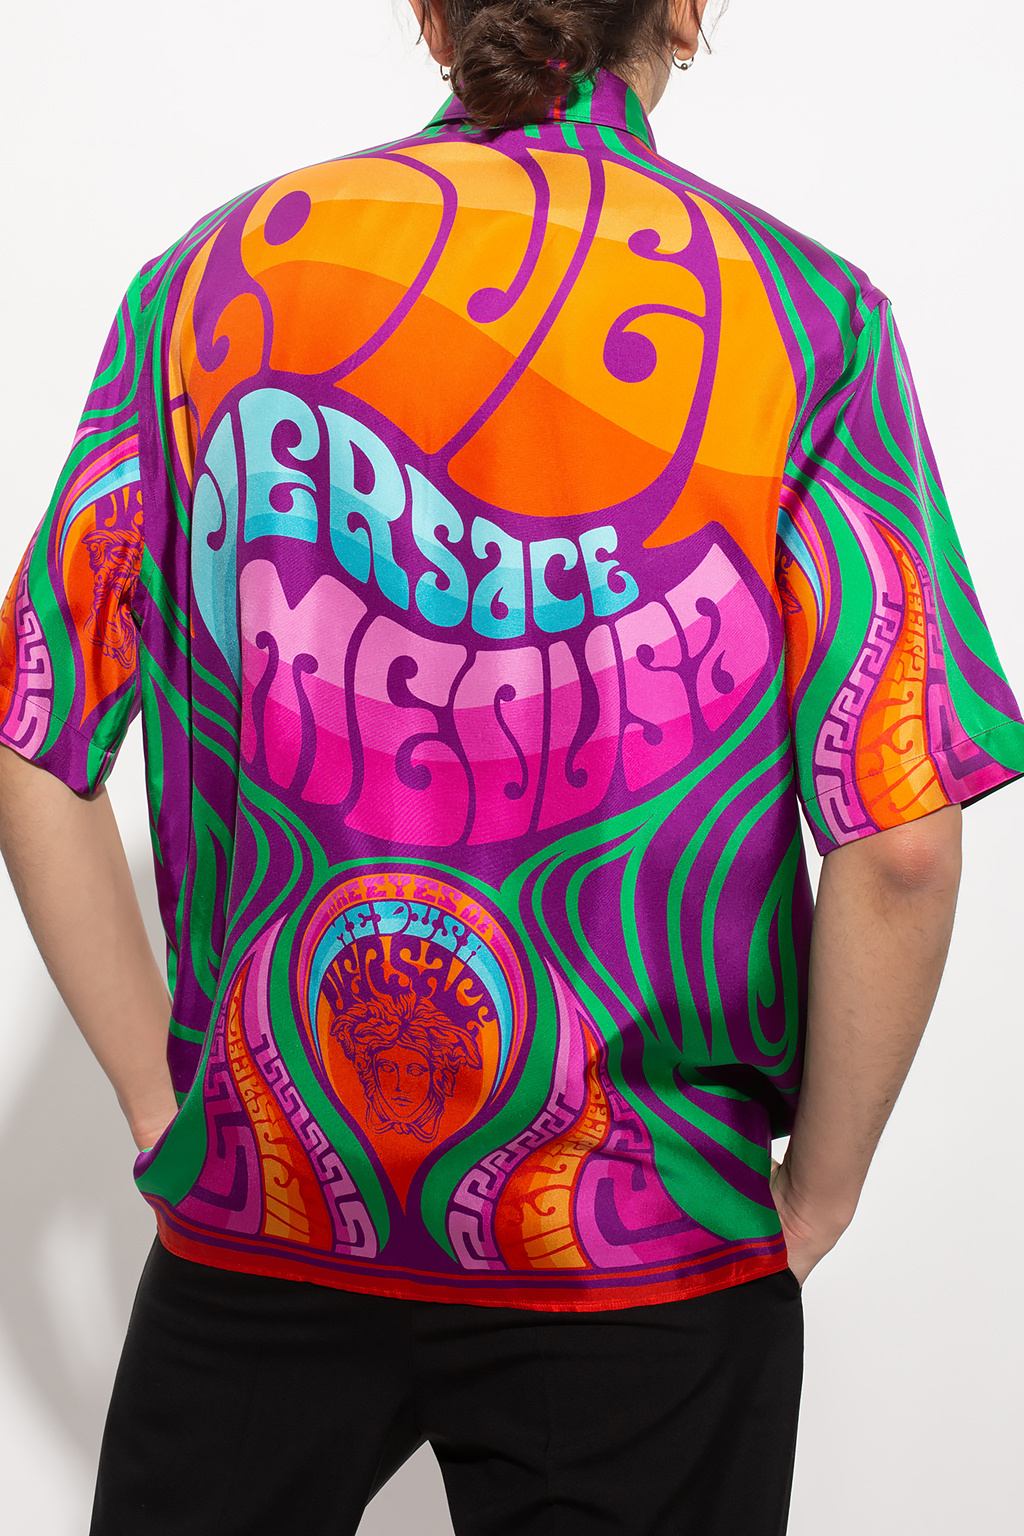 Versace Here s a look at some of the best Jordan Brand shirts to hook with the